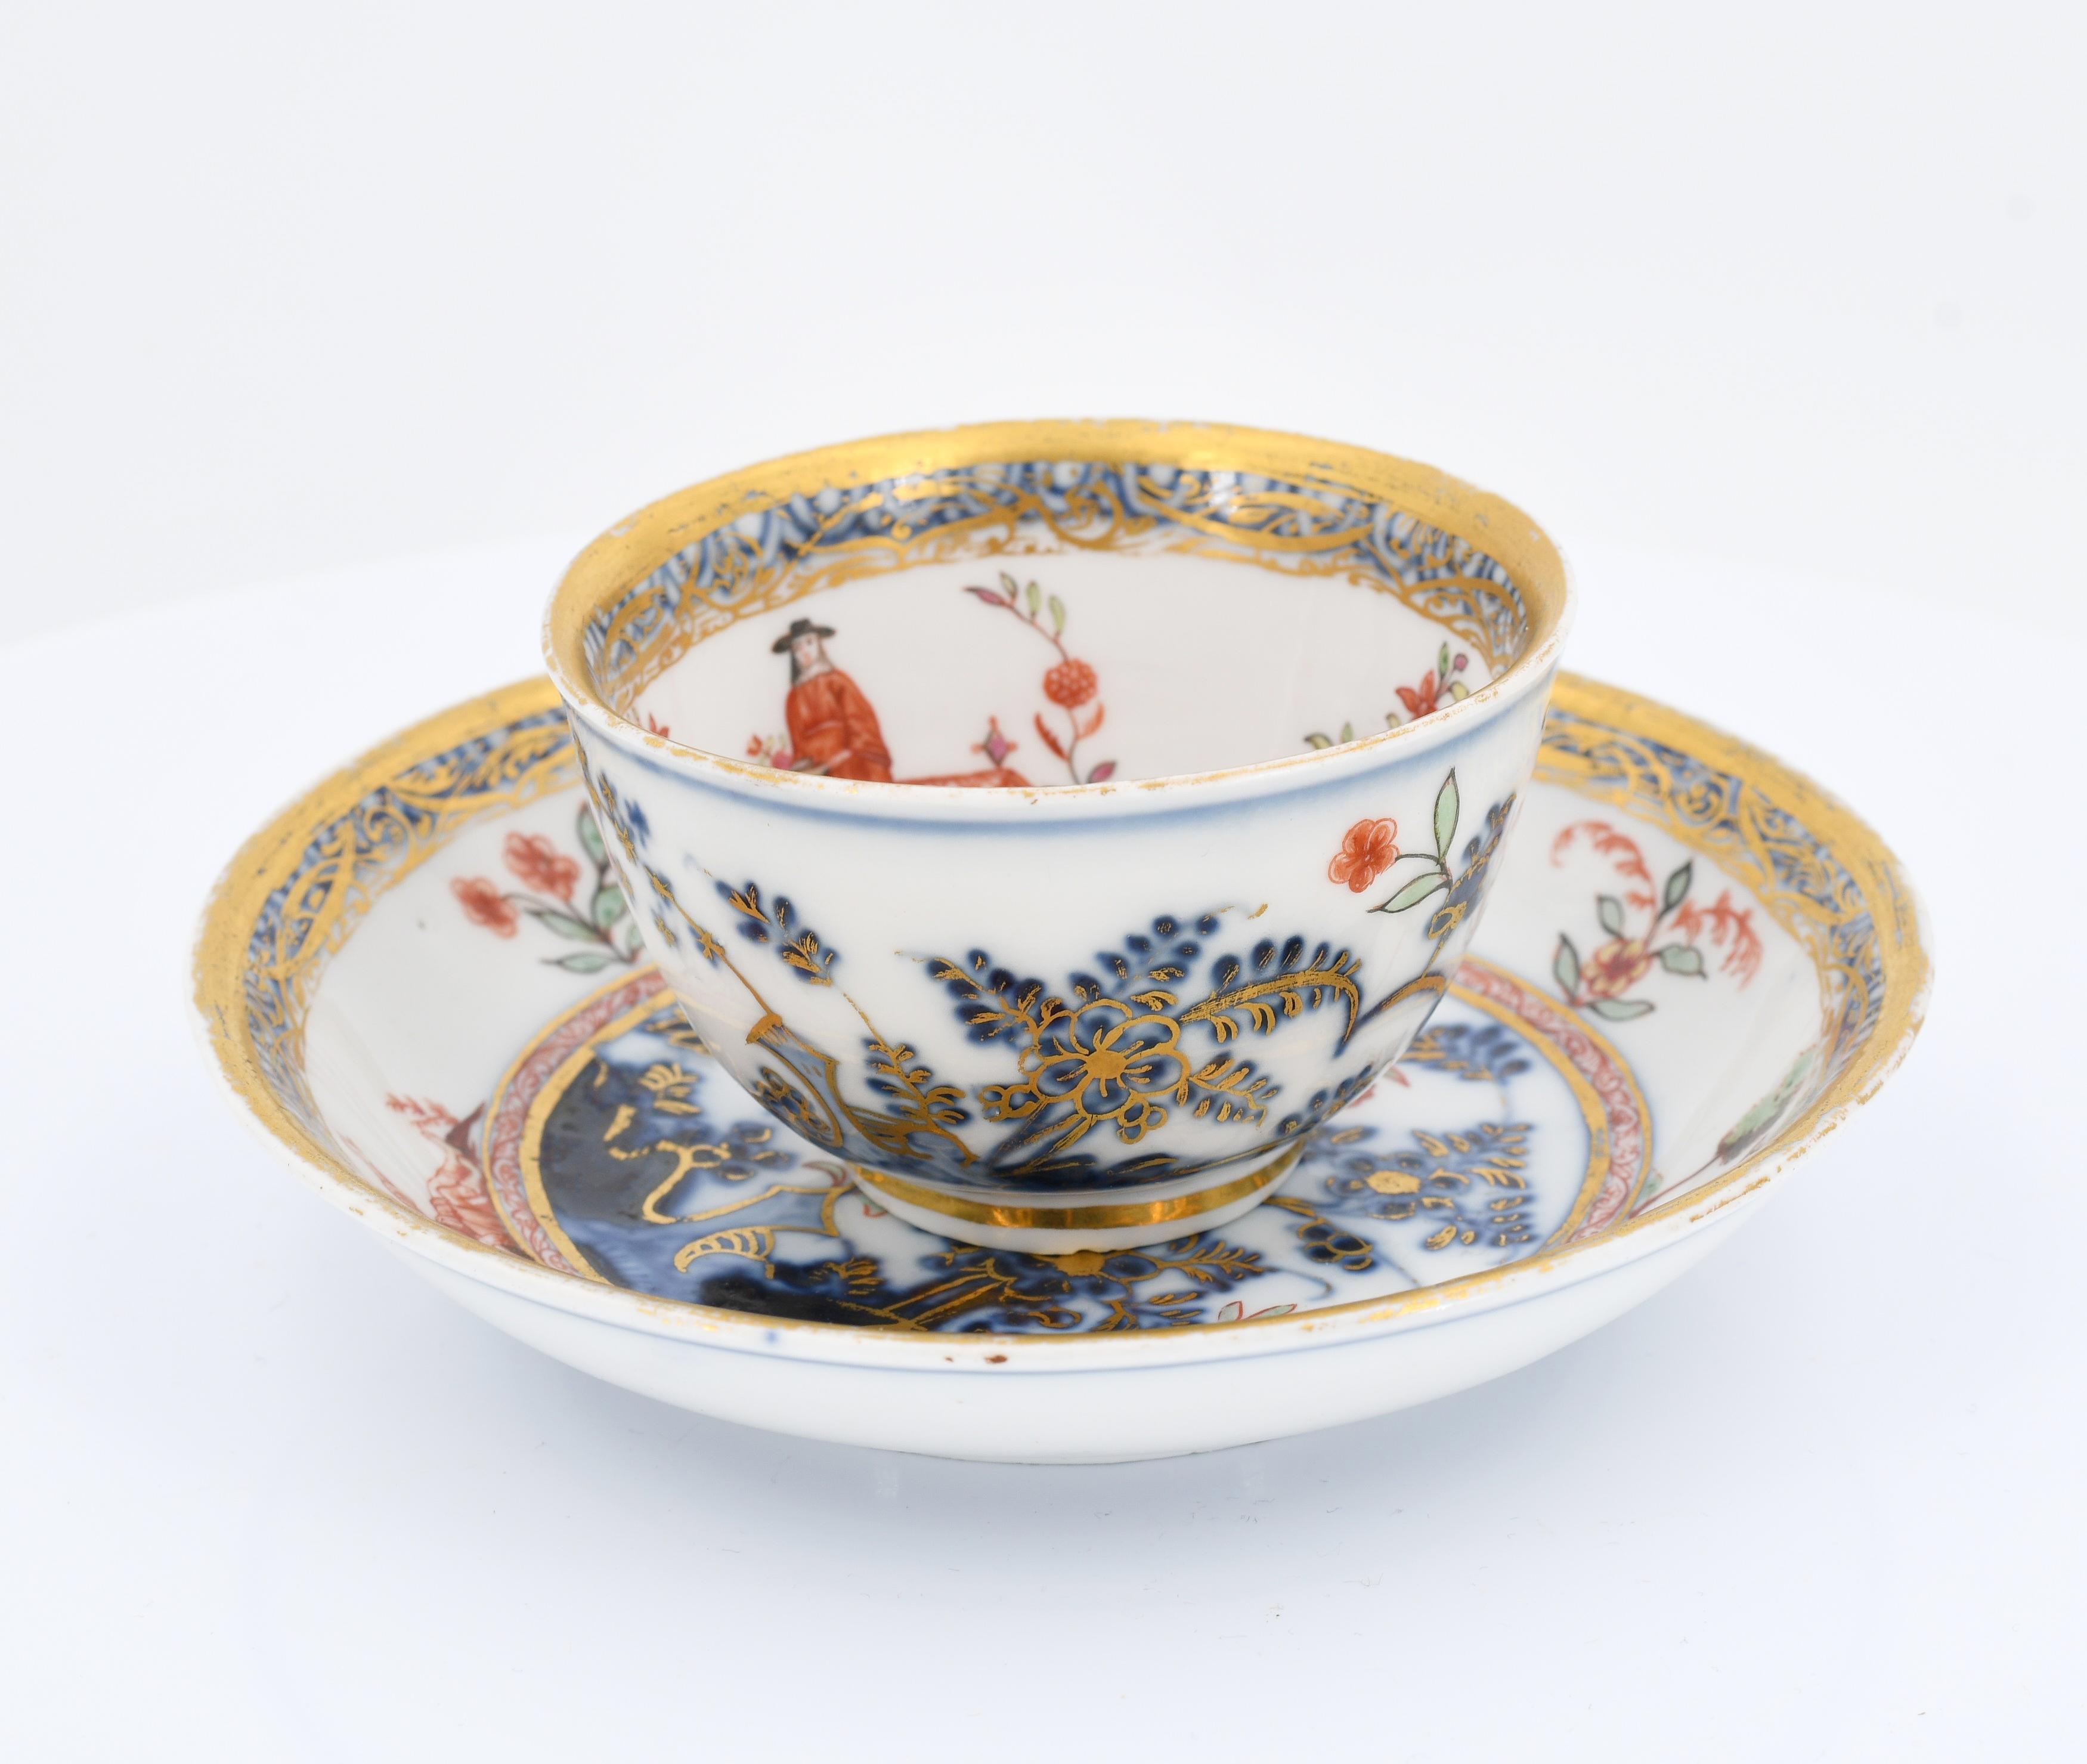 Cup and saucer with rock and bird décor - Image 6 of 8